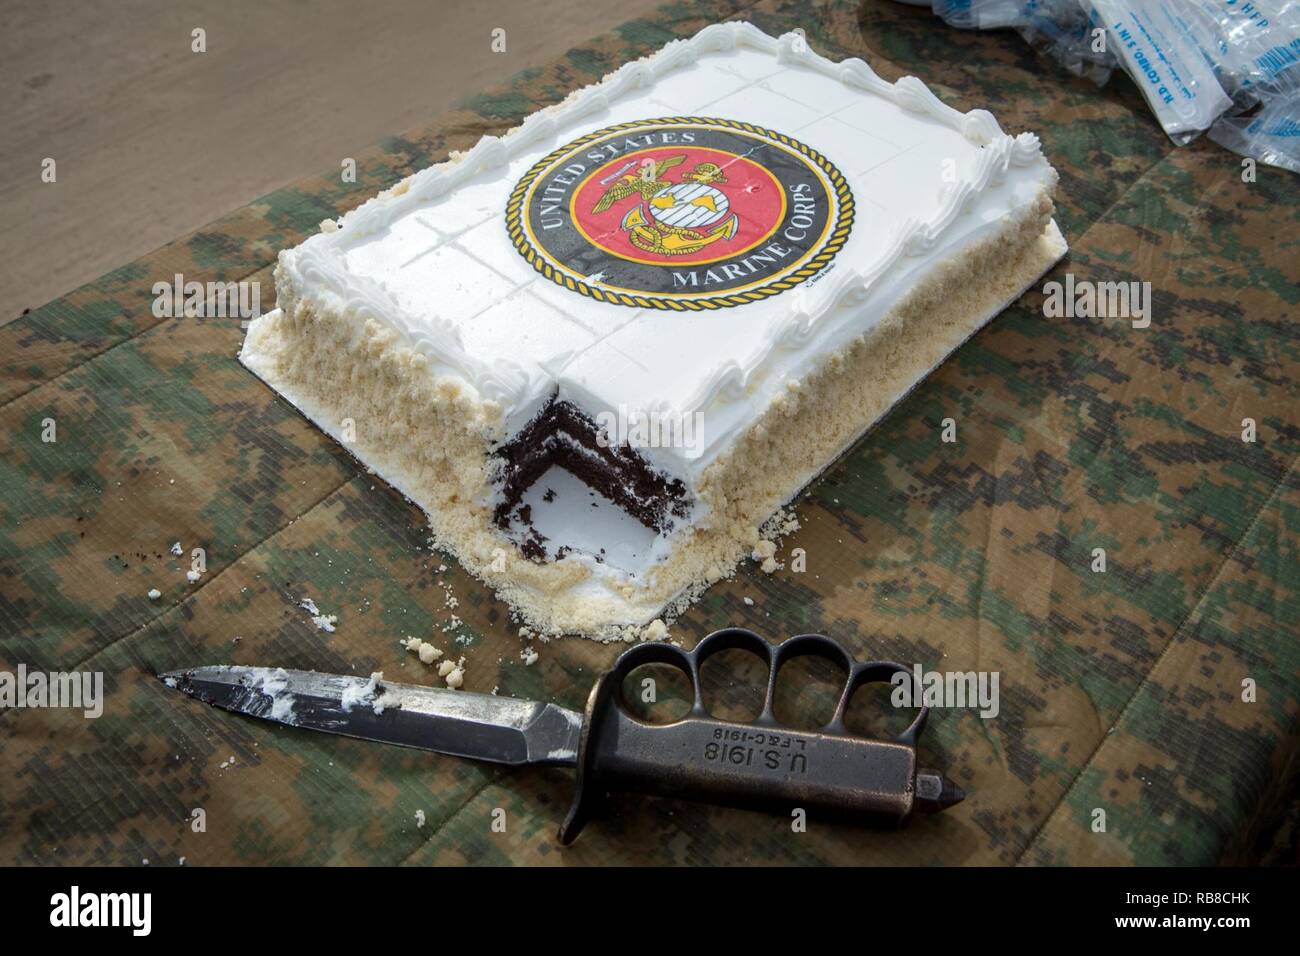 U.S. Marines from Weapons Company, 3rd Battalion, 7th Marine Regiment, Special Purpose Marine Air-Ground Task Force - Crisis Response - Central Command, hold a cake-cutting ceremony in honor of the 241st Marine Corps Birthday in Erbil, Iraq, Nov. 10, 2016. SPMAGTF-CR-CC is forward deployed in several host nations, with the ability to respond to a variety of contingencies rapidly and effectively. Stock Photo